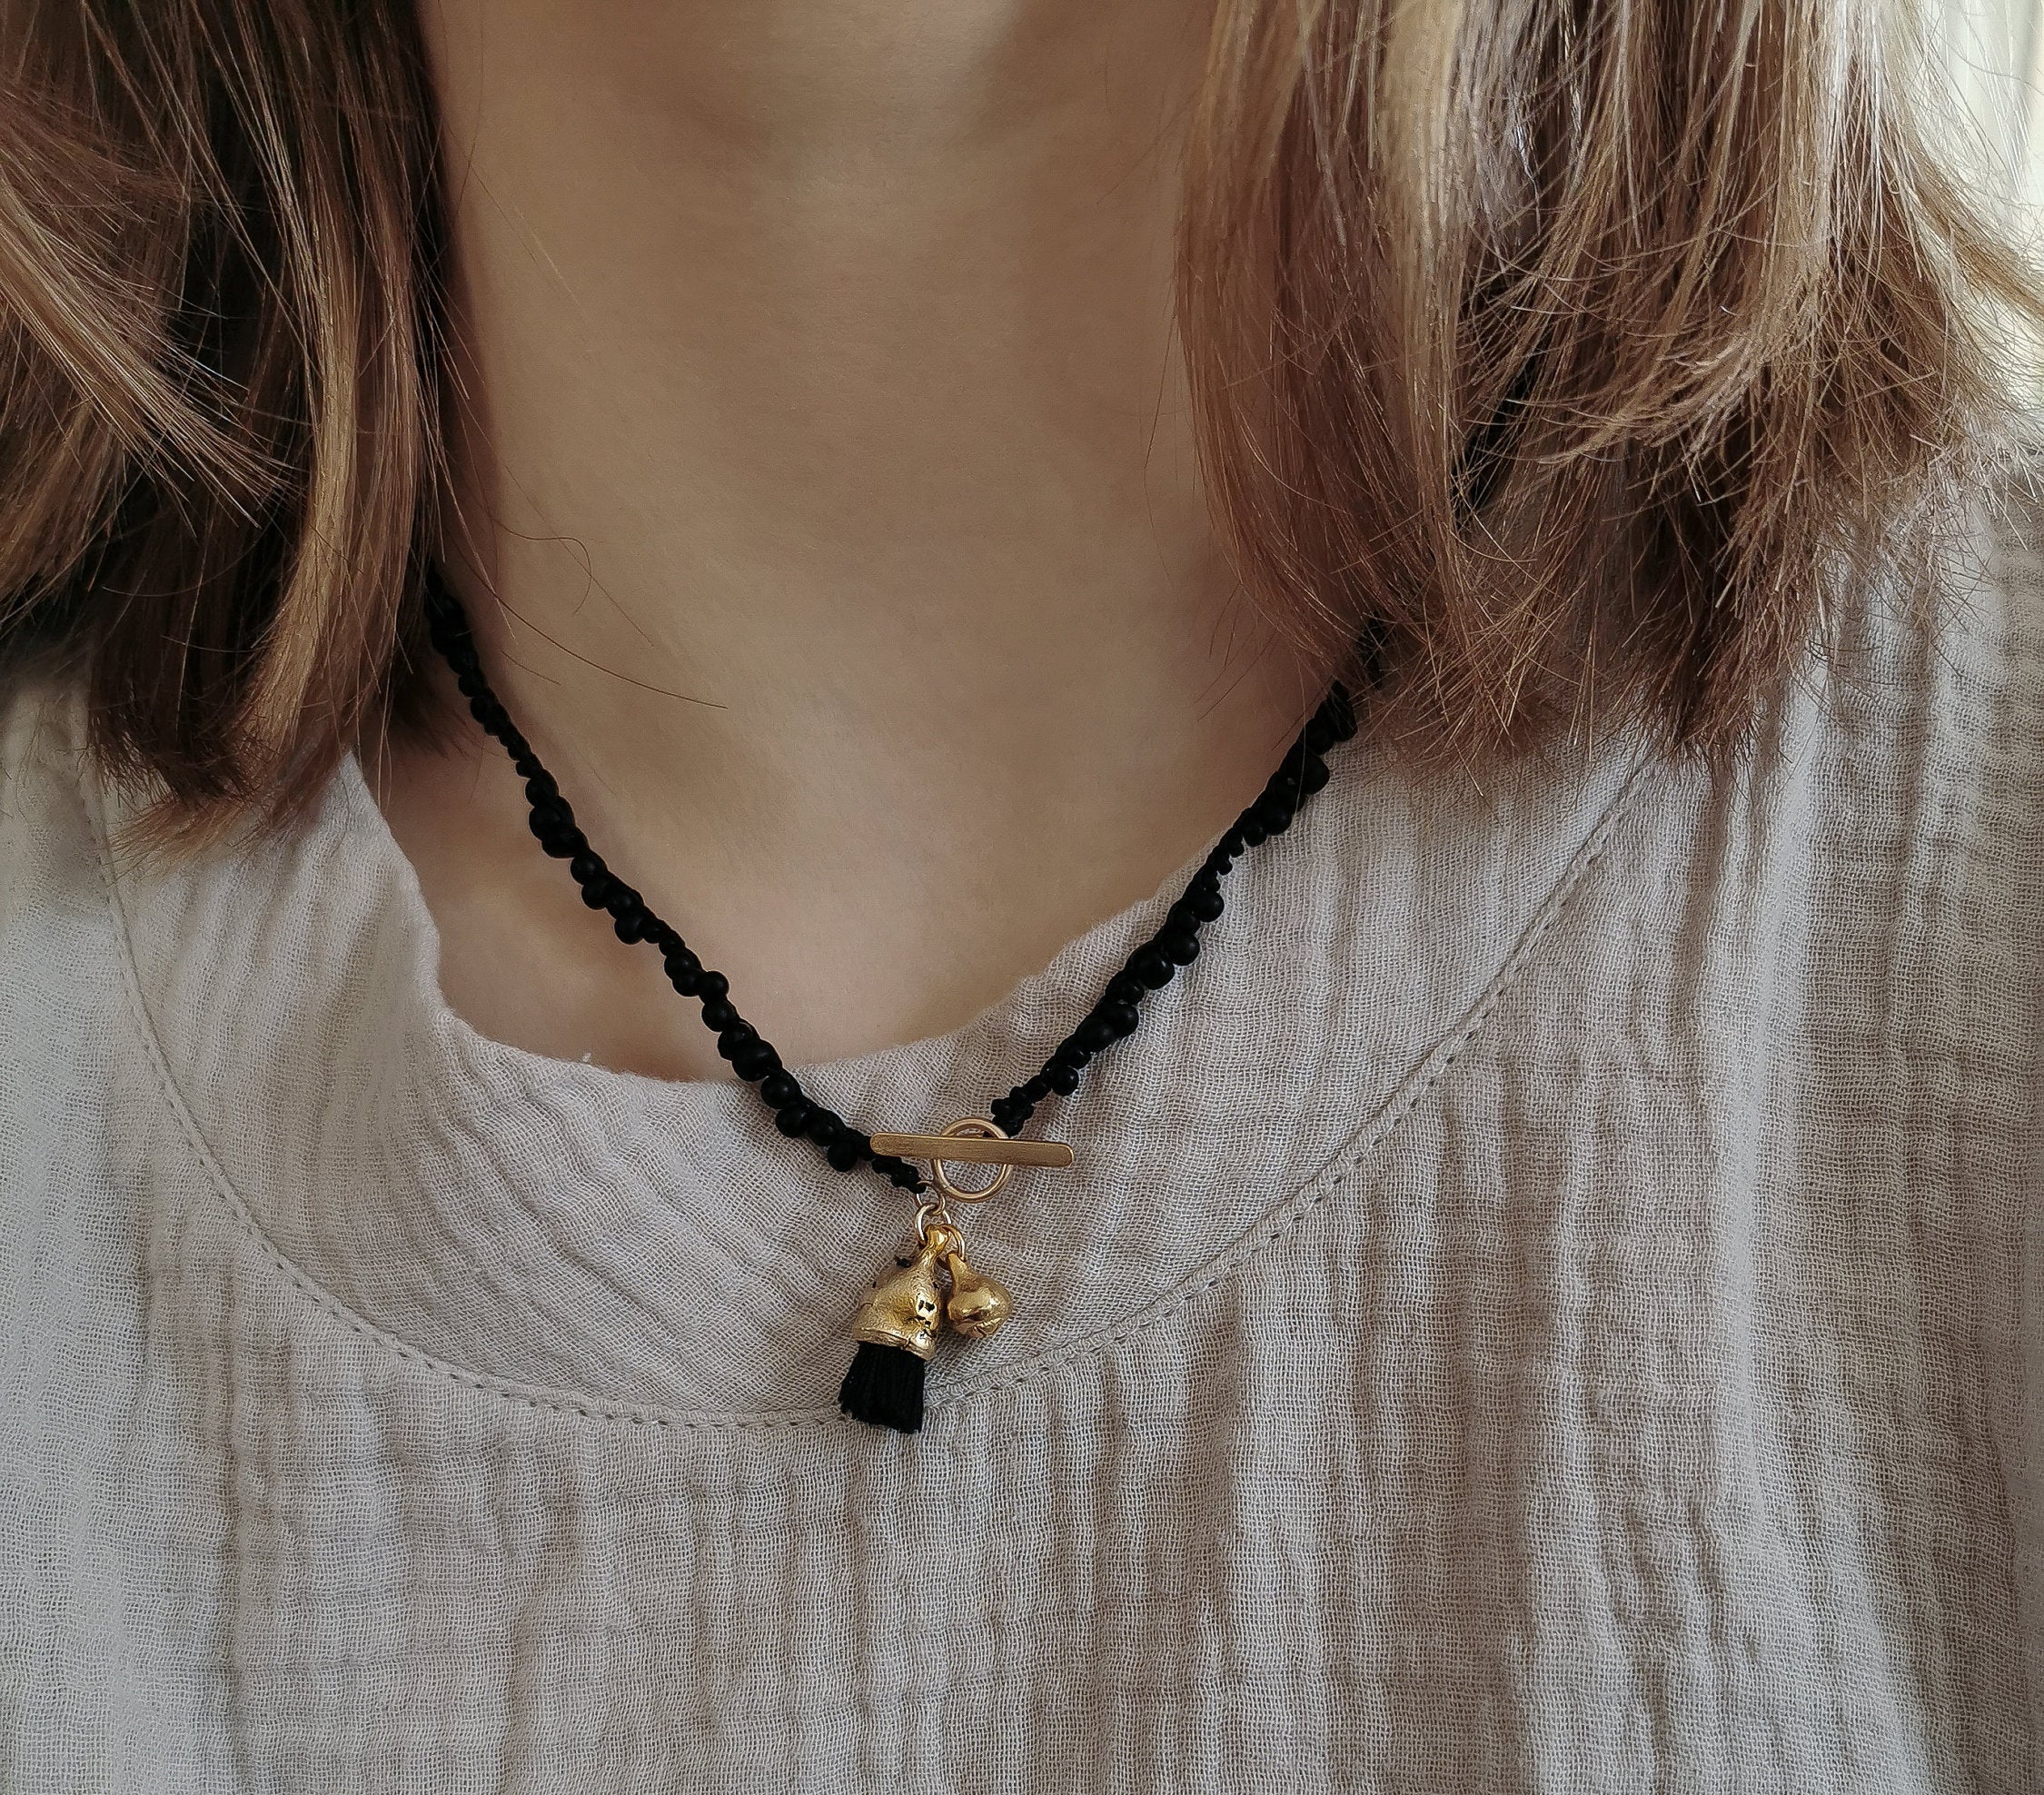 Gold & Black necklace, Statement necklace, Knitted beads necklace, Black necklace, Handmade Necklace, Spinel stone necklace - hs